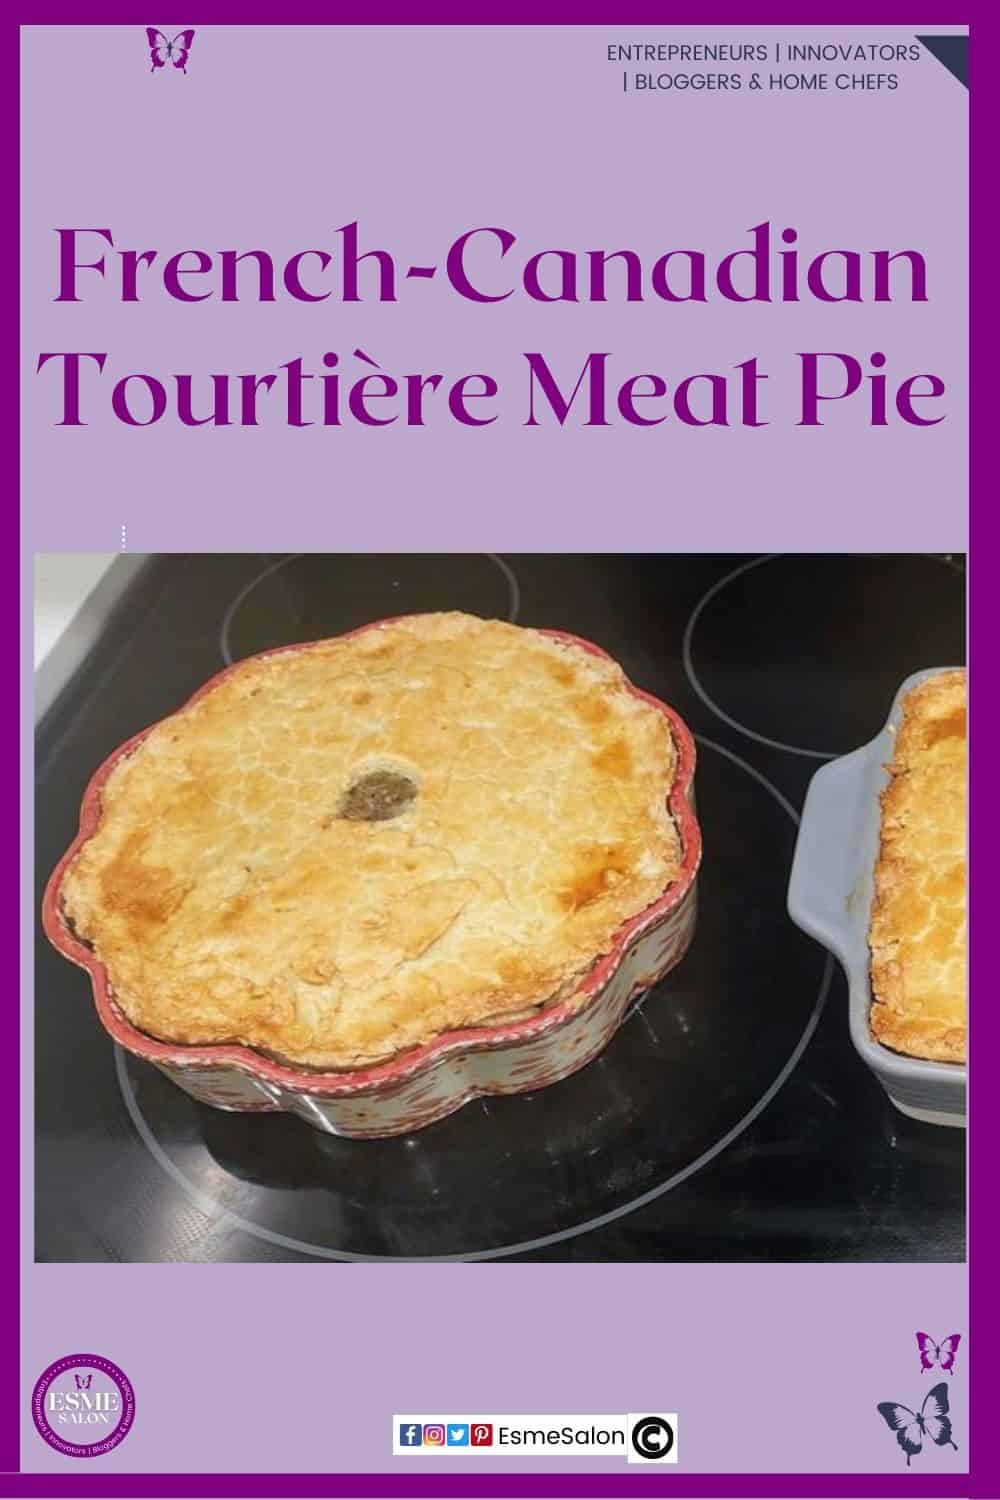 an image of 2 Tourtière Meat Pies, one in a round and one in a square dish and already baked